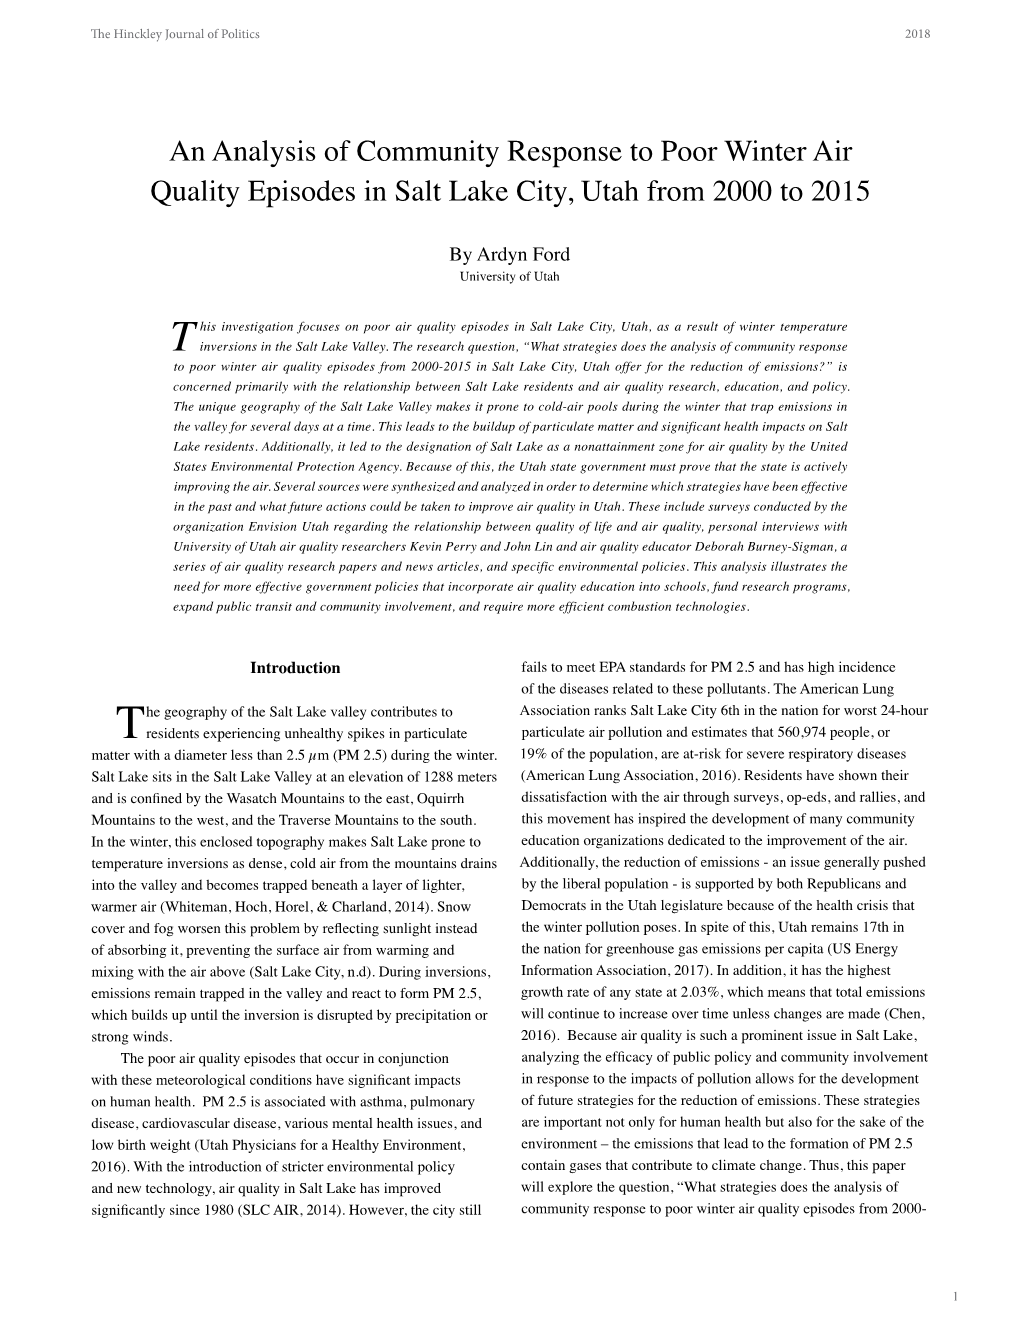 An Analysis of Community Response to Poor Winter Air Quality Episodes in Salt Lake City, Utah from 2000 to 2015